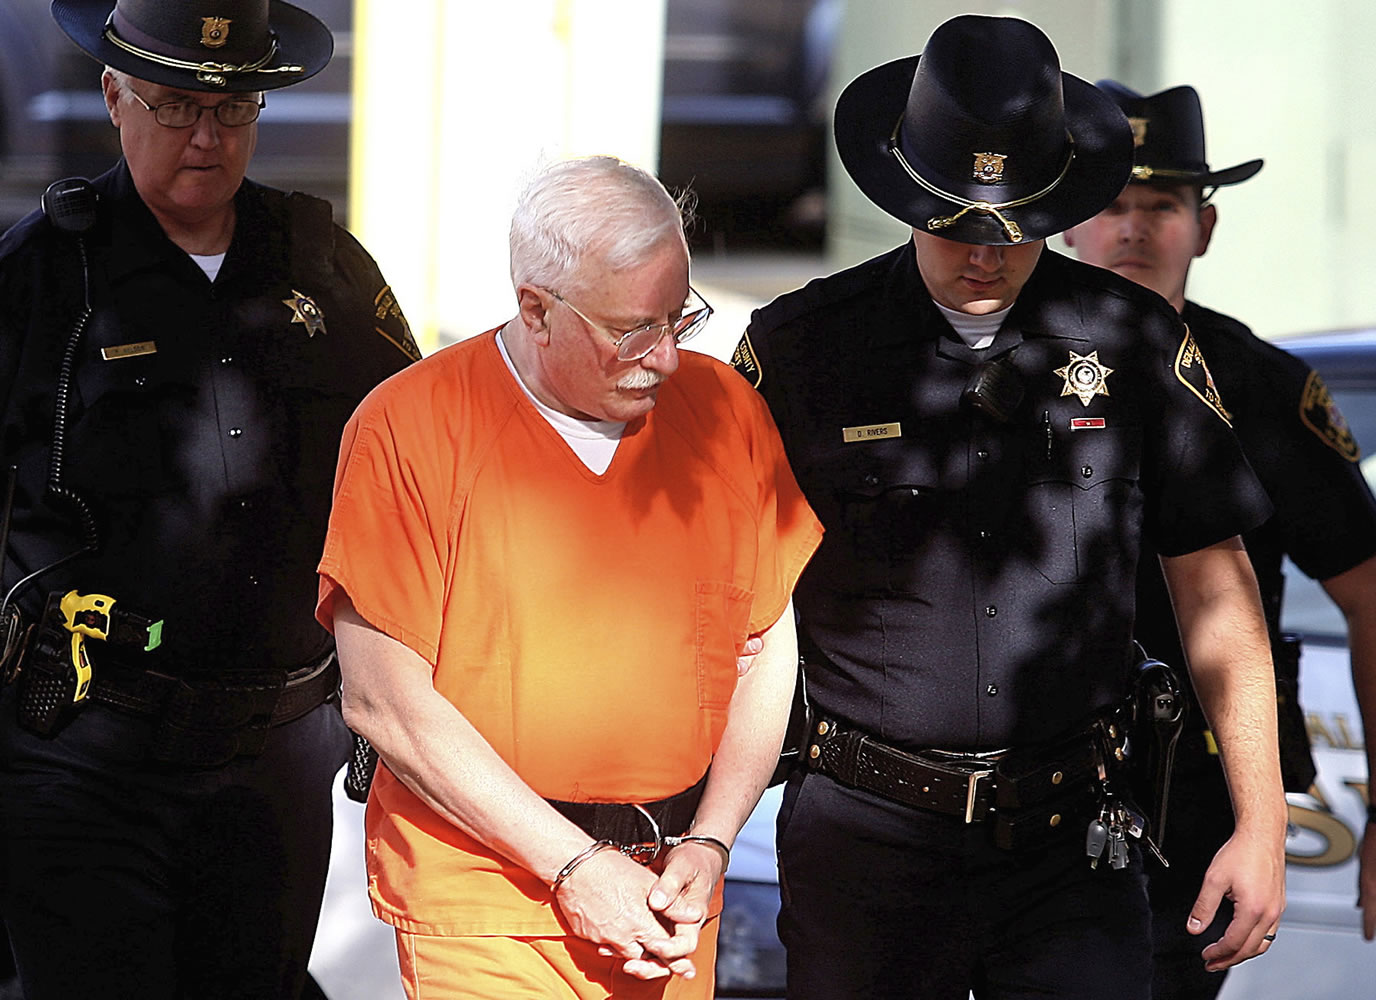 Jack McCullough is escorted into the DeKalb County Courthouse in Sycamore, Ill., by DeKalb County Sheriff's deputies Sept. 4. Friday, Sept. 14, in Sycamore Judge James Hallock pronounced McCullough guilty of murder, kidnapping and abduction in the 1957 death of 7-year-old Maria Ridulph of Sycamore.